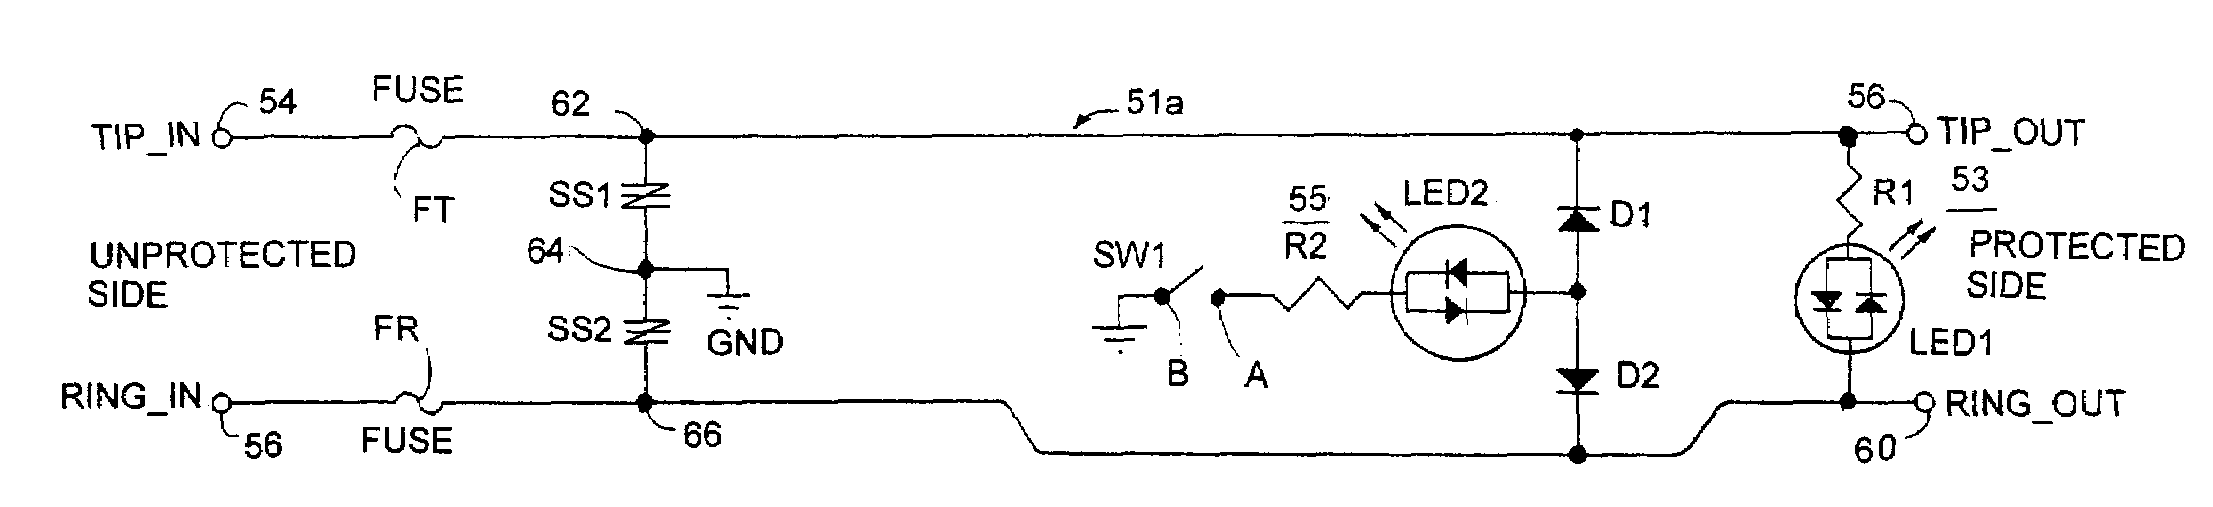 Surge protector assembly with ground-connector status indicator circuitry